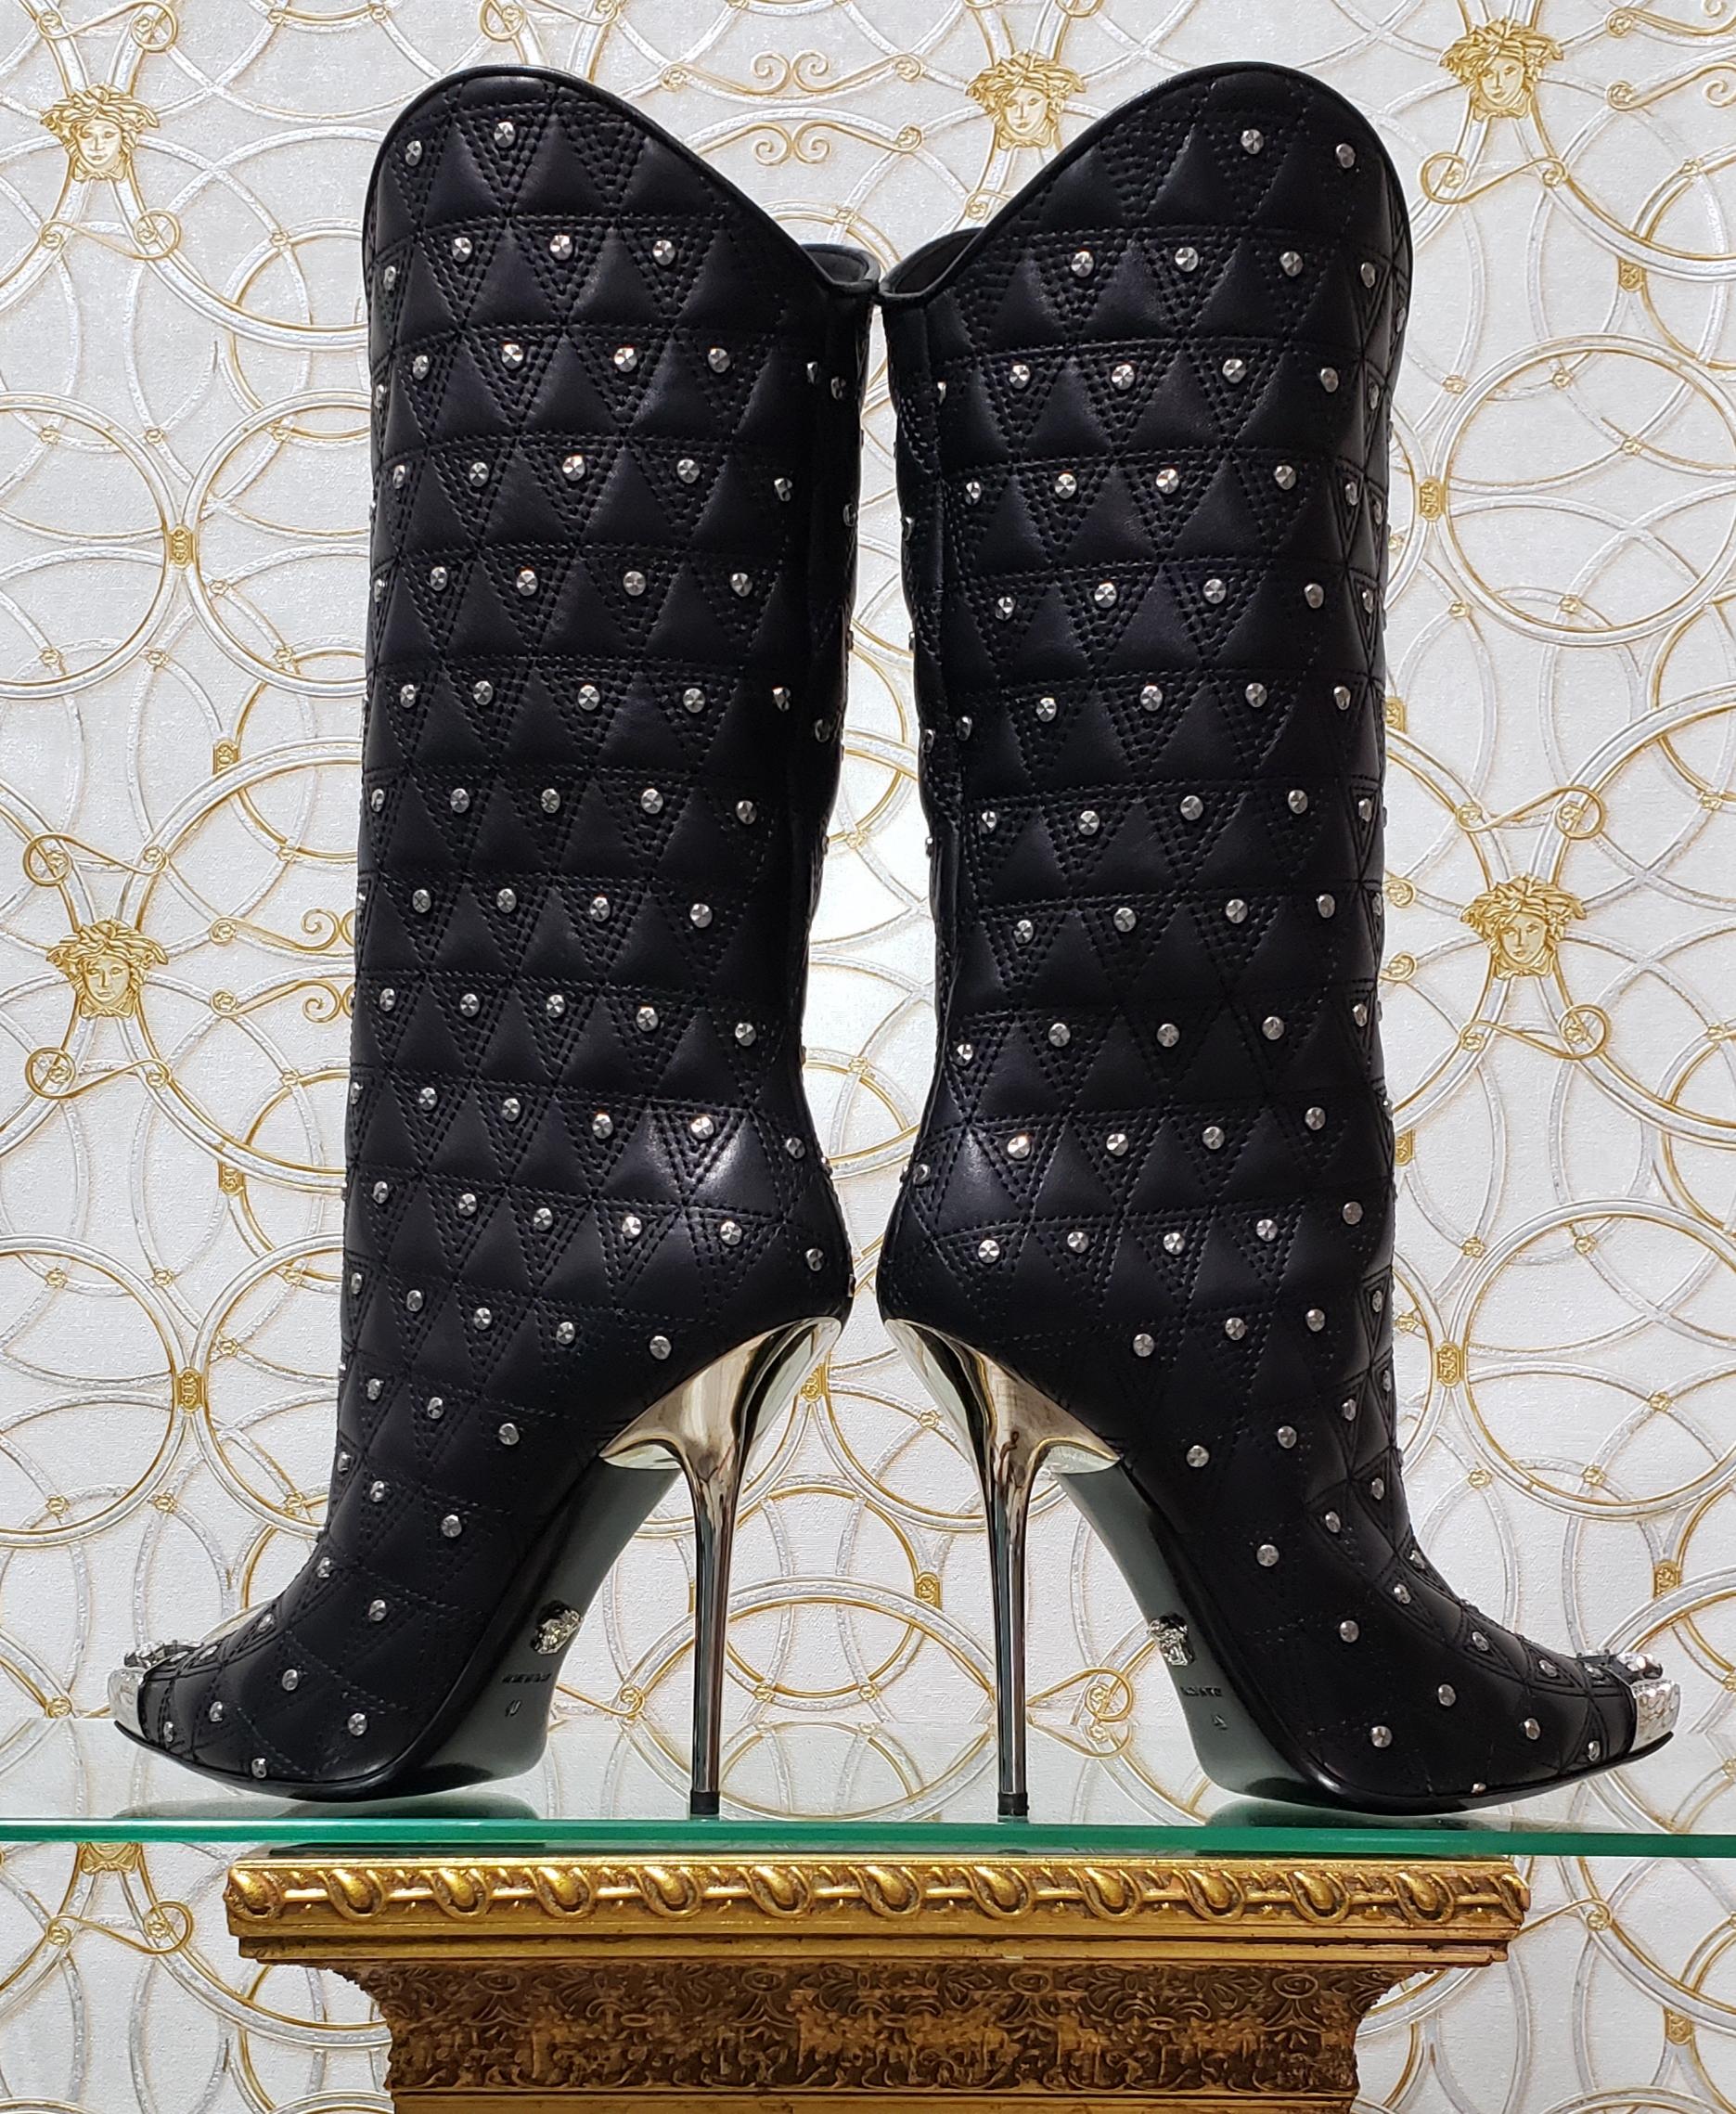 Fall/2013 L # 2 NEW VERSACE BLACK LEATHER STUDDED WESTERN STILETTO Boots 39 3